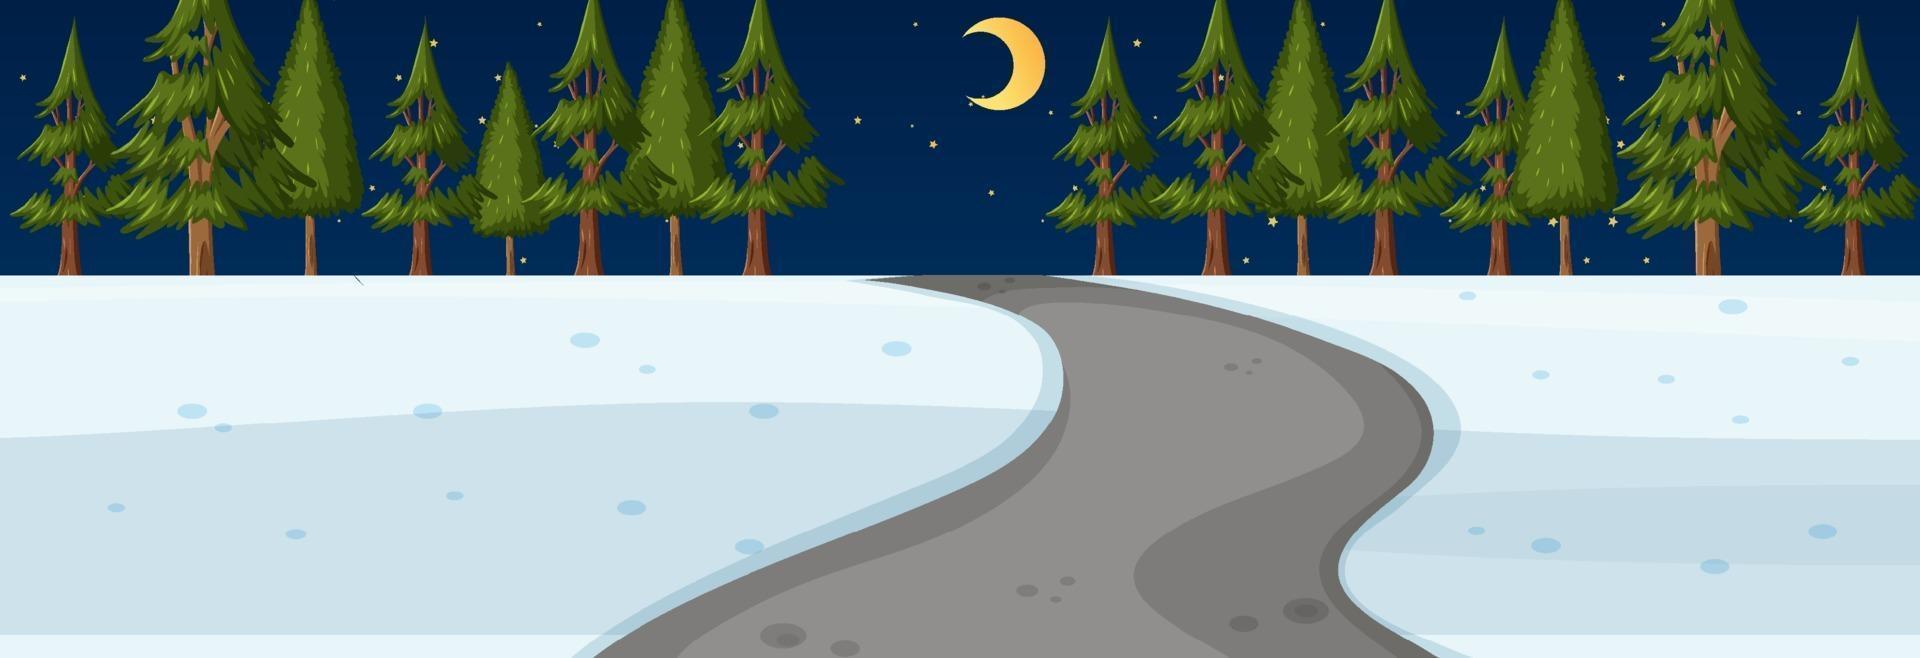 Winter season with road through the park at night time horizontal scene vector